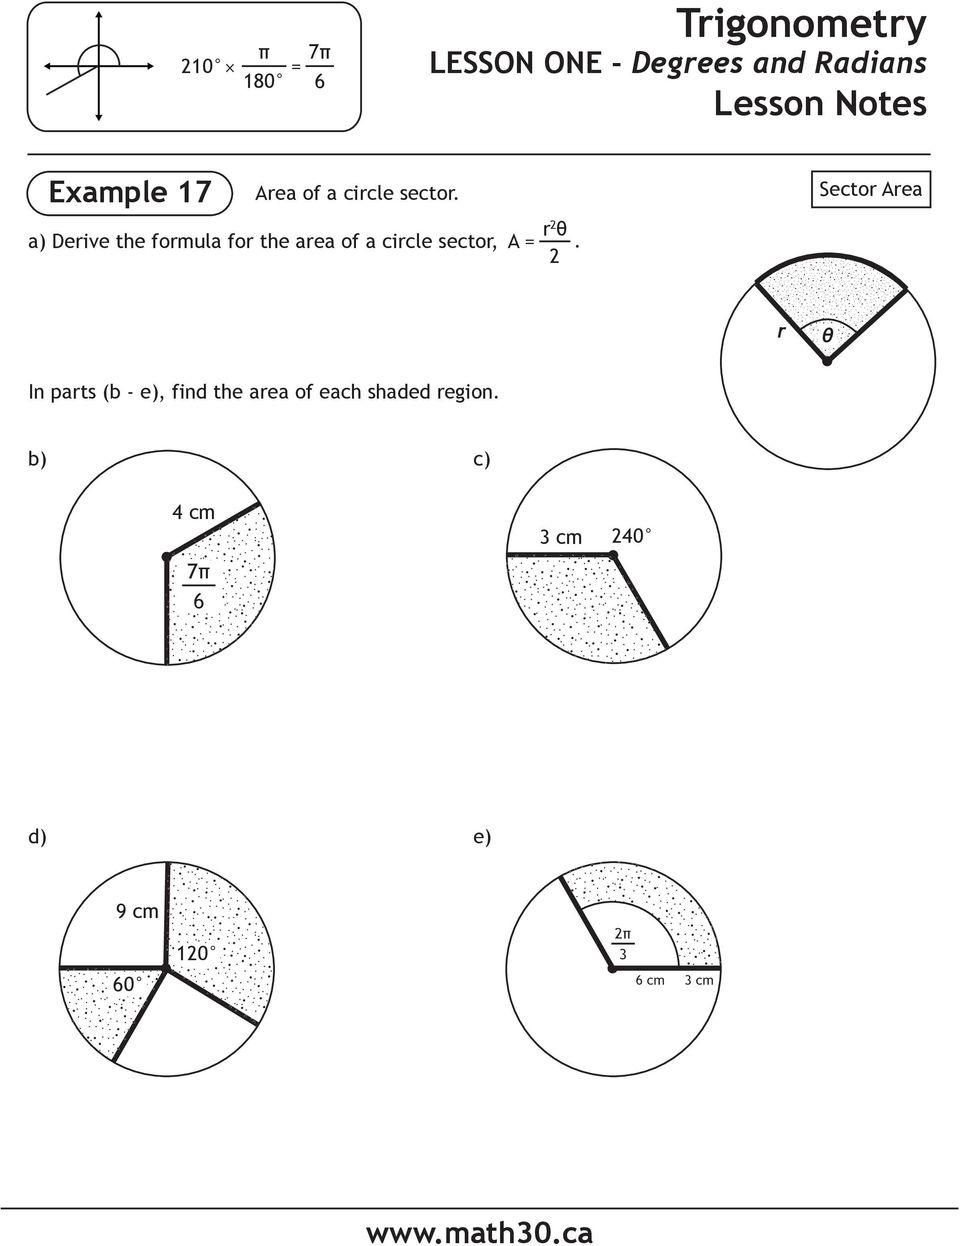 r 2 a) Derive the formula for the area of a circle sector, A